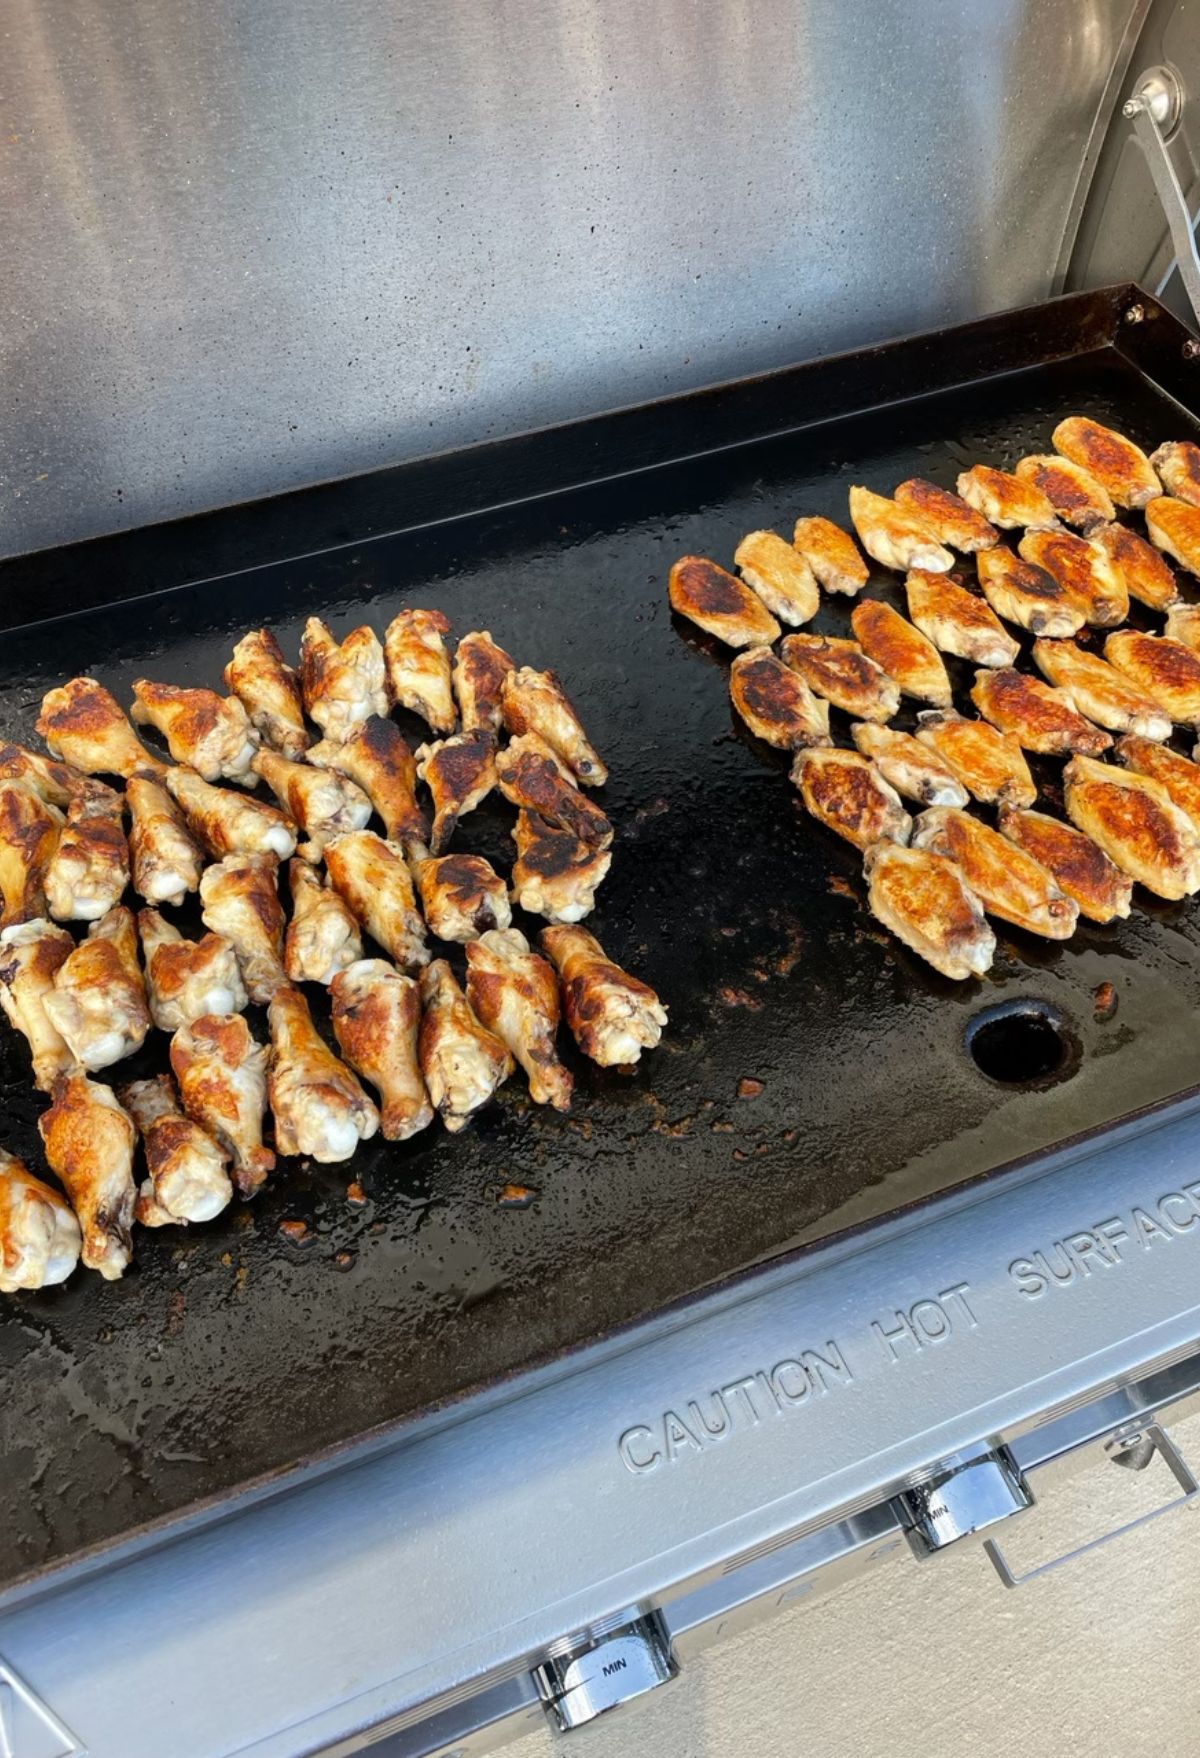 A group of chicken legs on a grill.